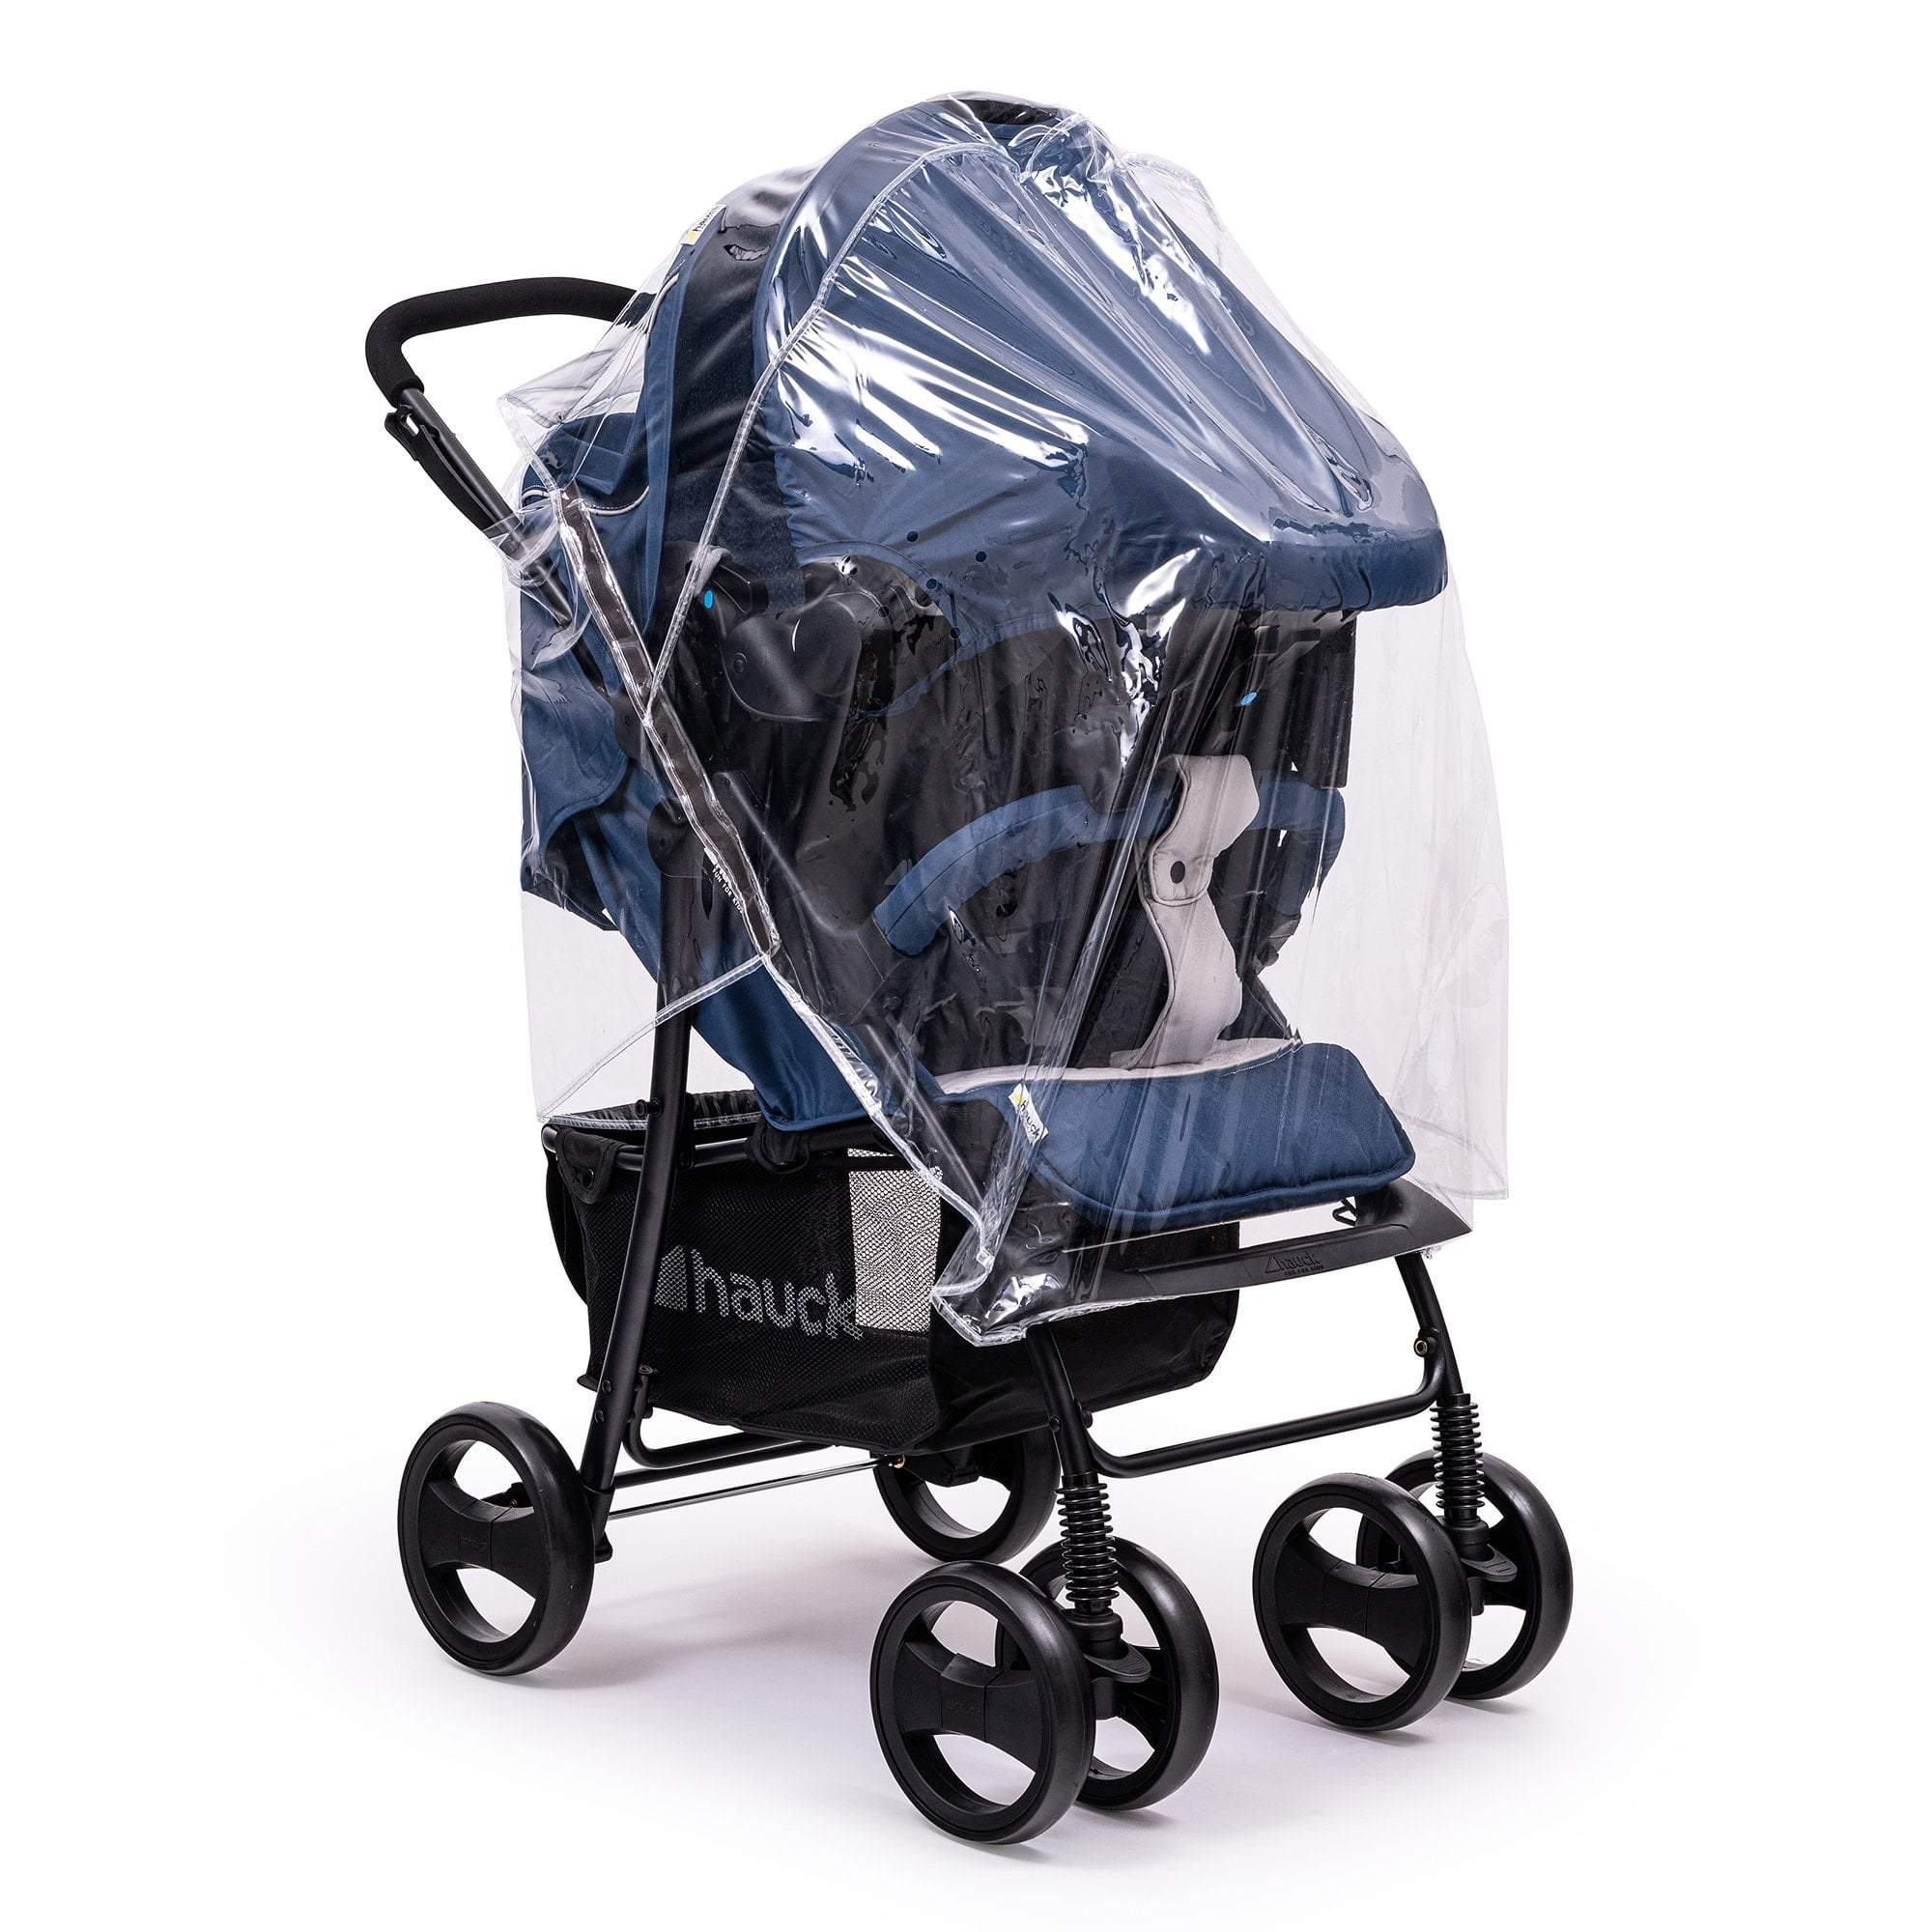 Travel System Raincover Compatible with Tutti Bambini - Fits All Models -  | For Your Little One